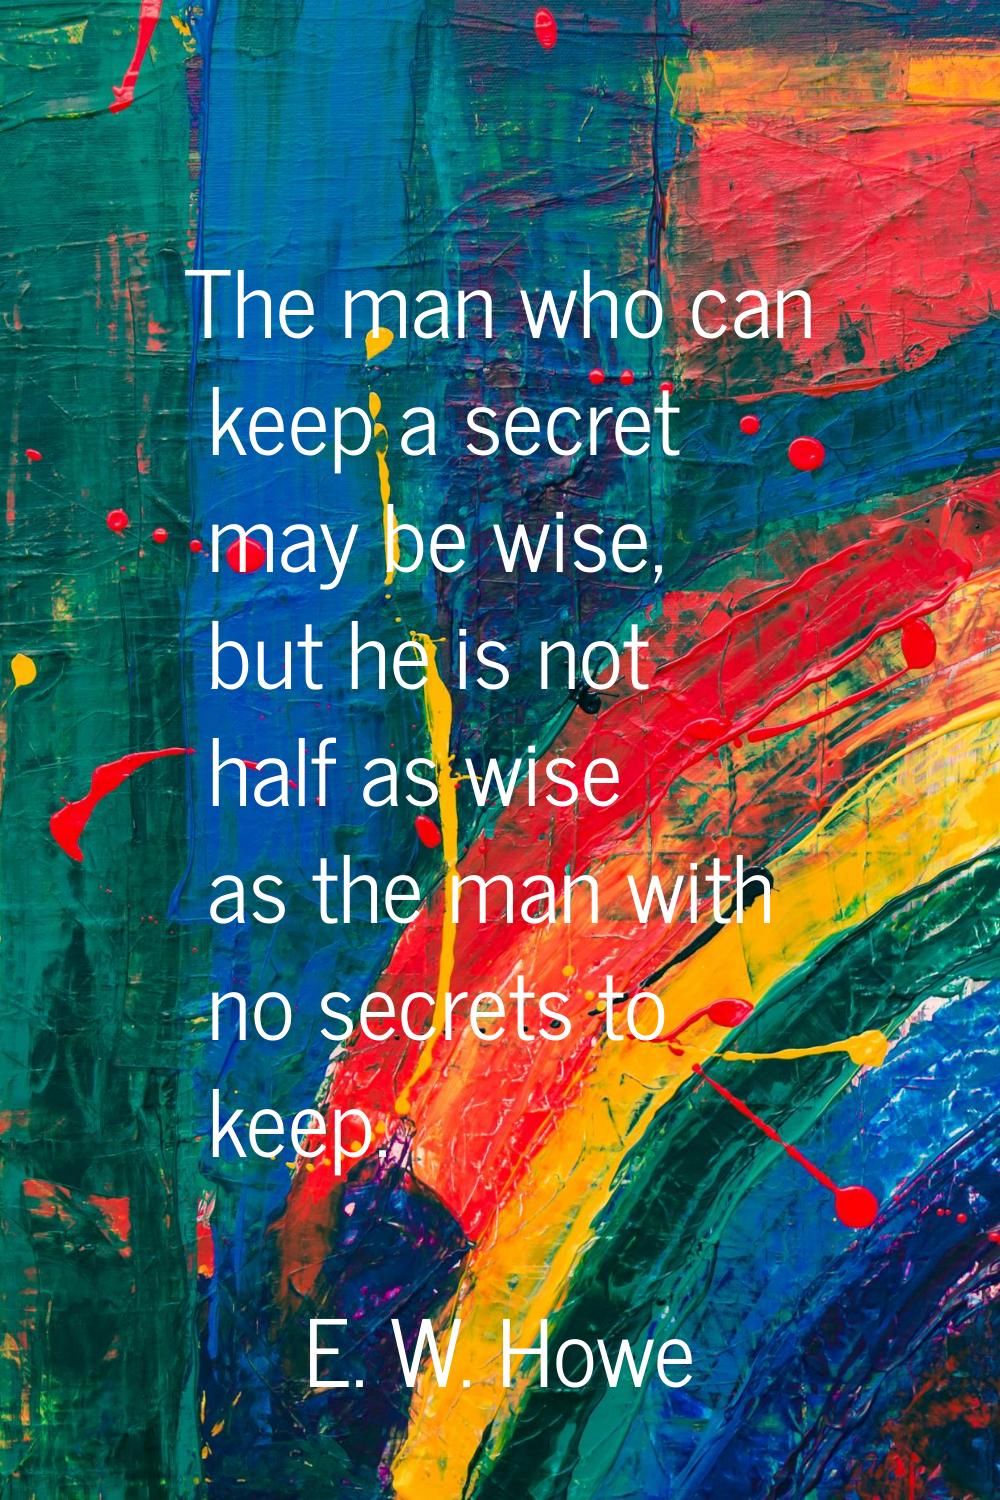 The man who can keep a secret may be wise, but he is not half as wise as the man with no secrets to